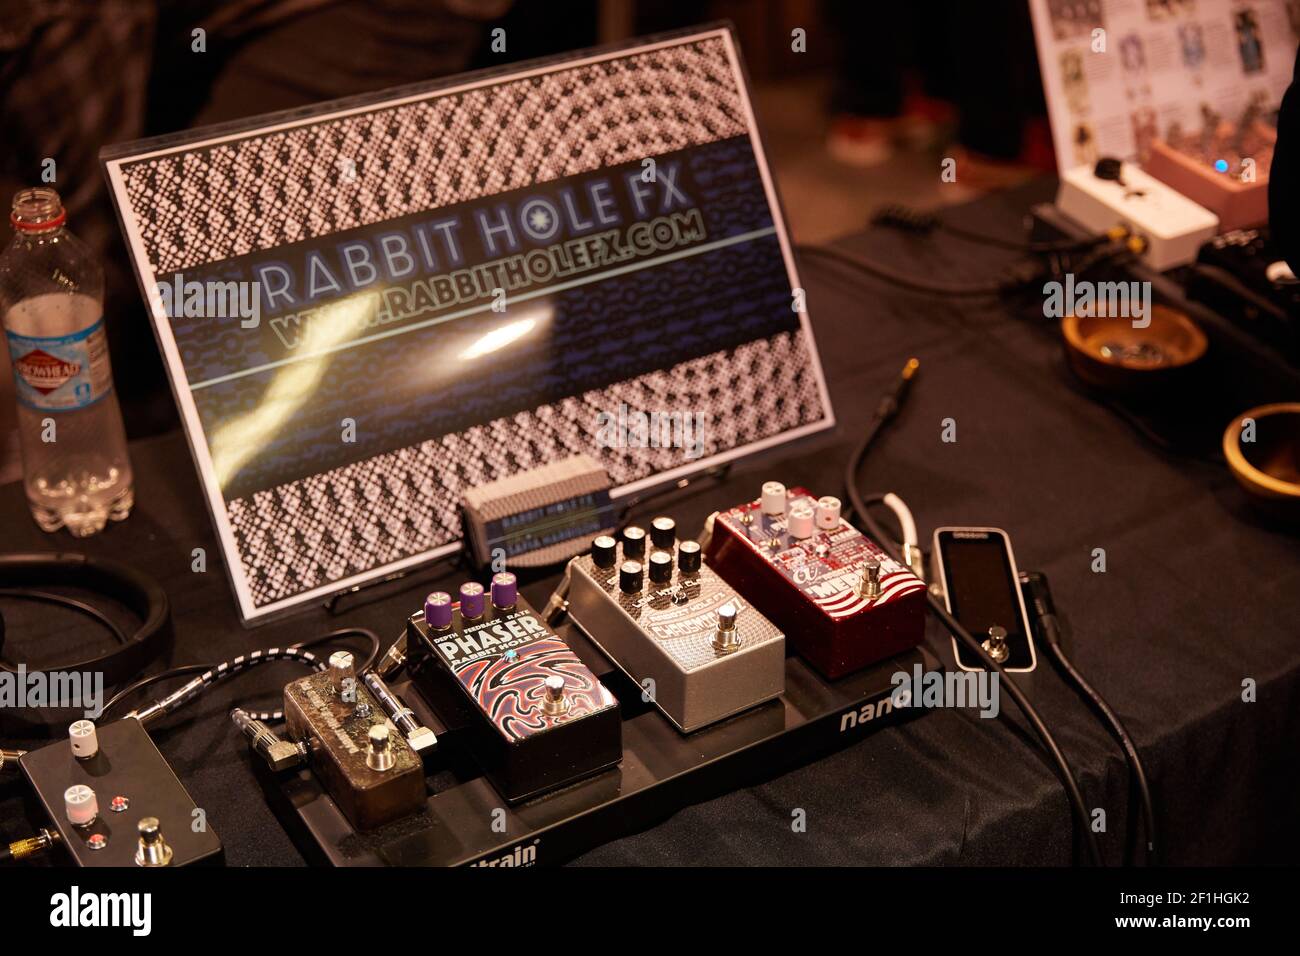 Rabbit Hole FX Guitar Pedal Display at Musical Instrument Convention Stock Photo